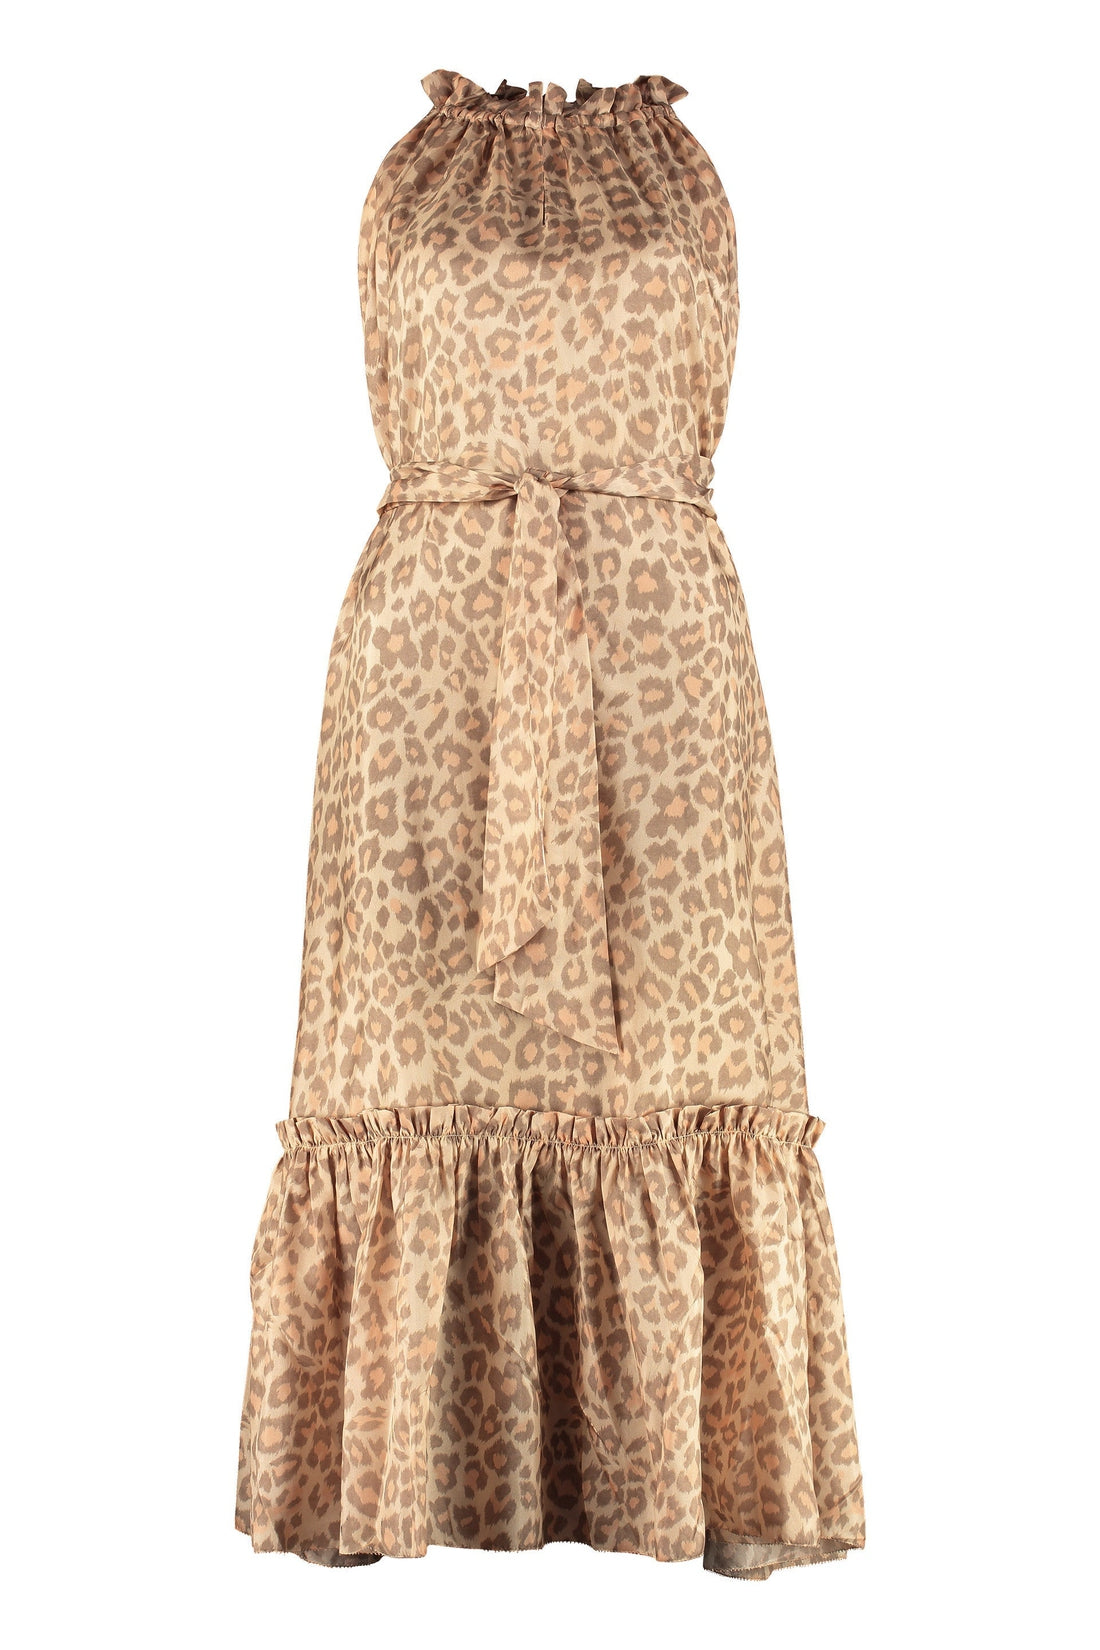 Zimmermann-OUTLET-SALE-Kirra printed dress with wrinkles-ARCHIVIST